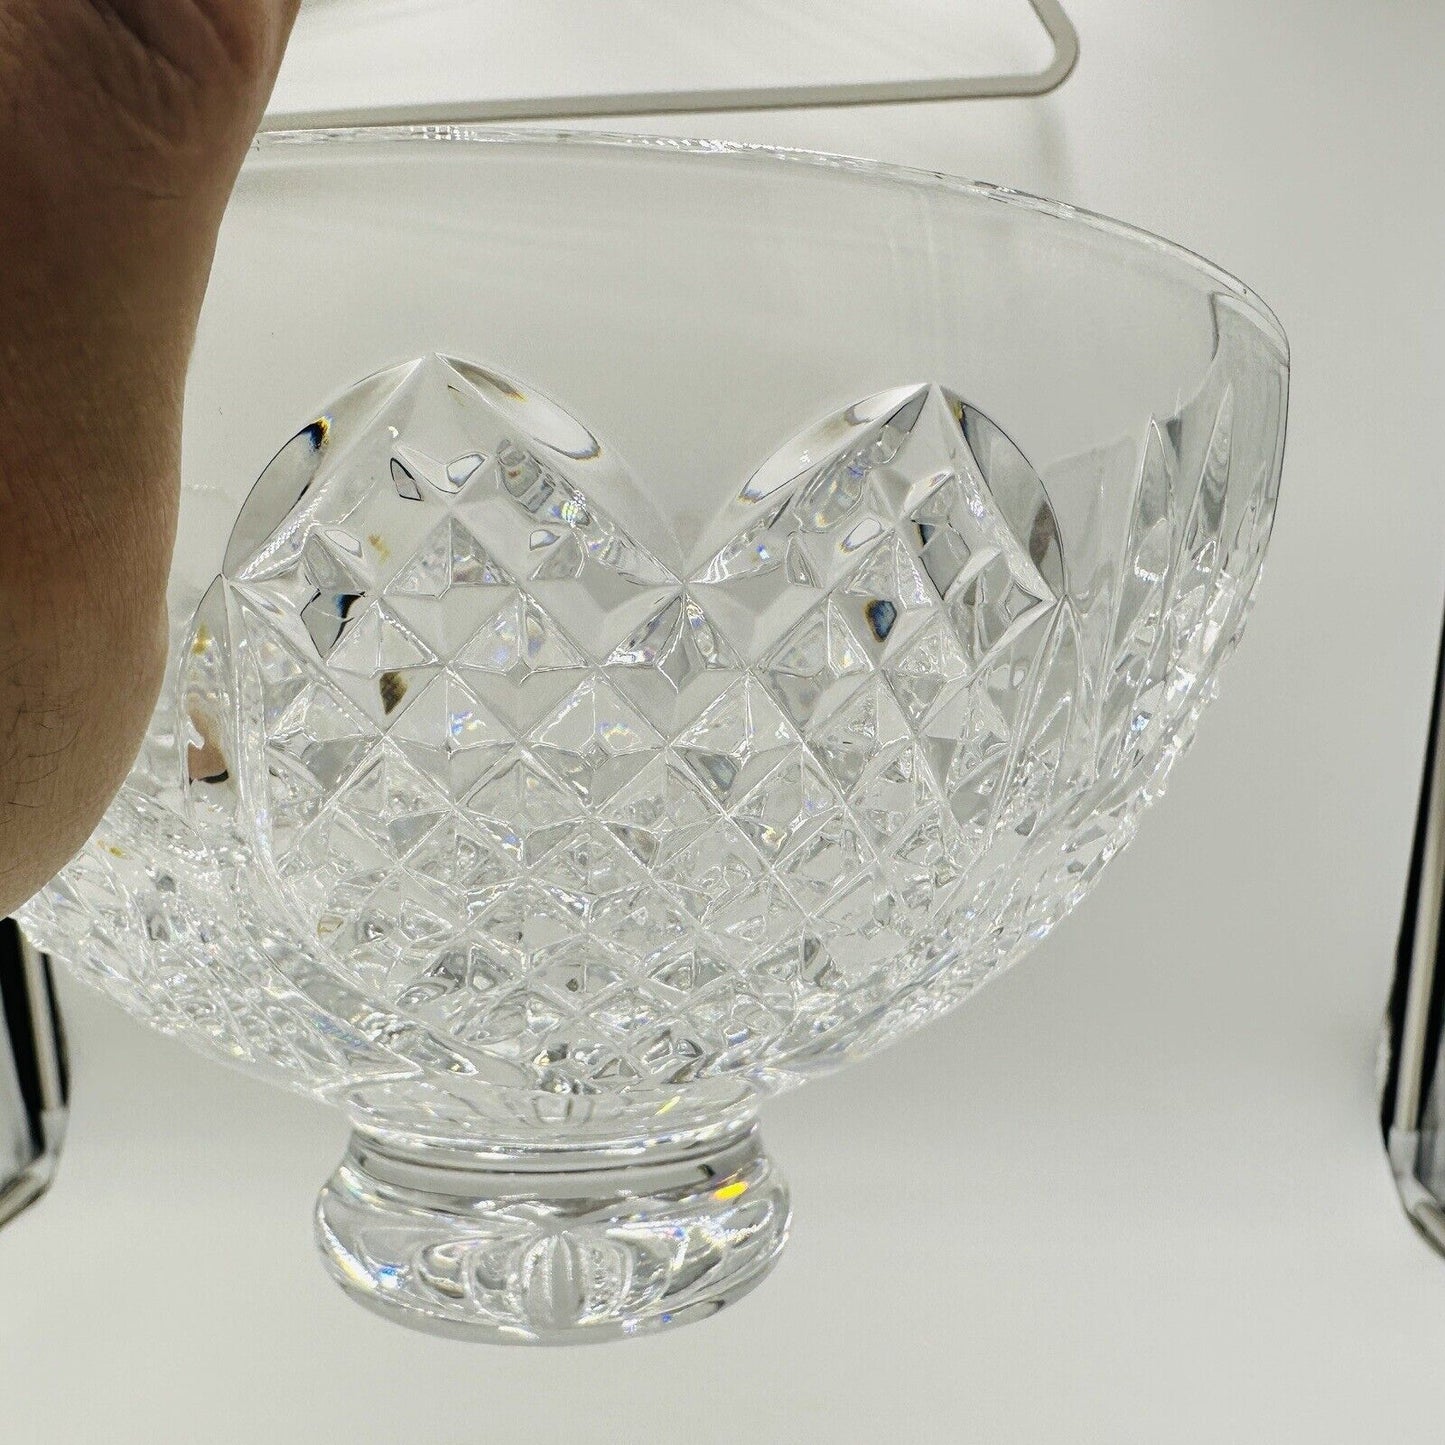 Waterford Crystal Wedding Heirloom 6" Bowl Hearts Made Ireland 109163 Collection